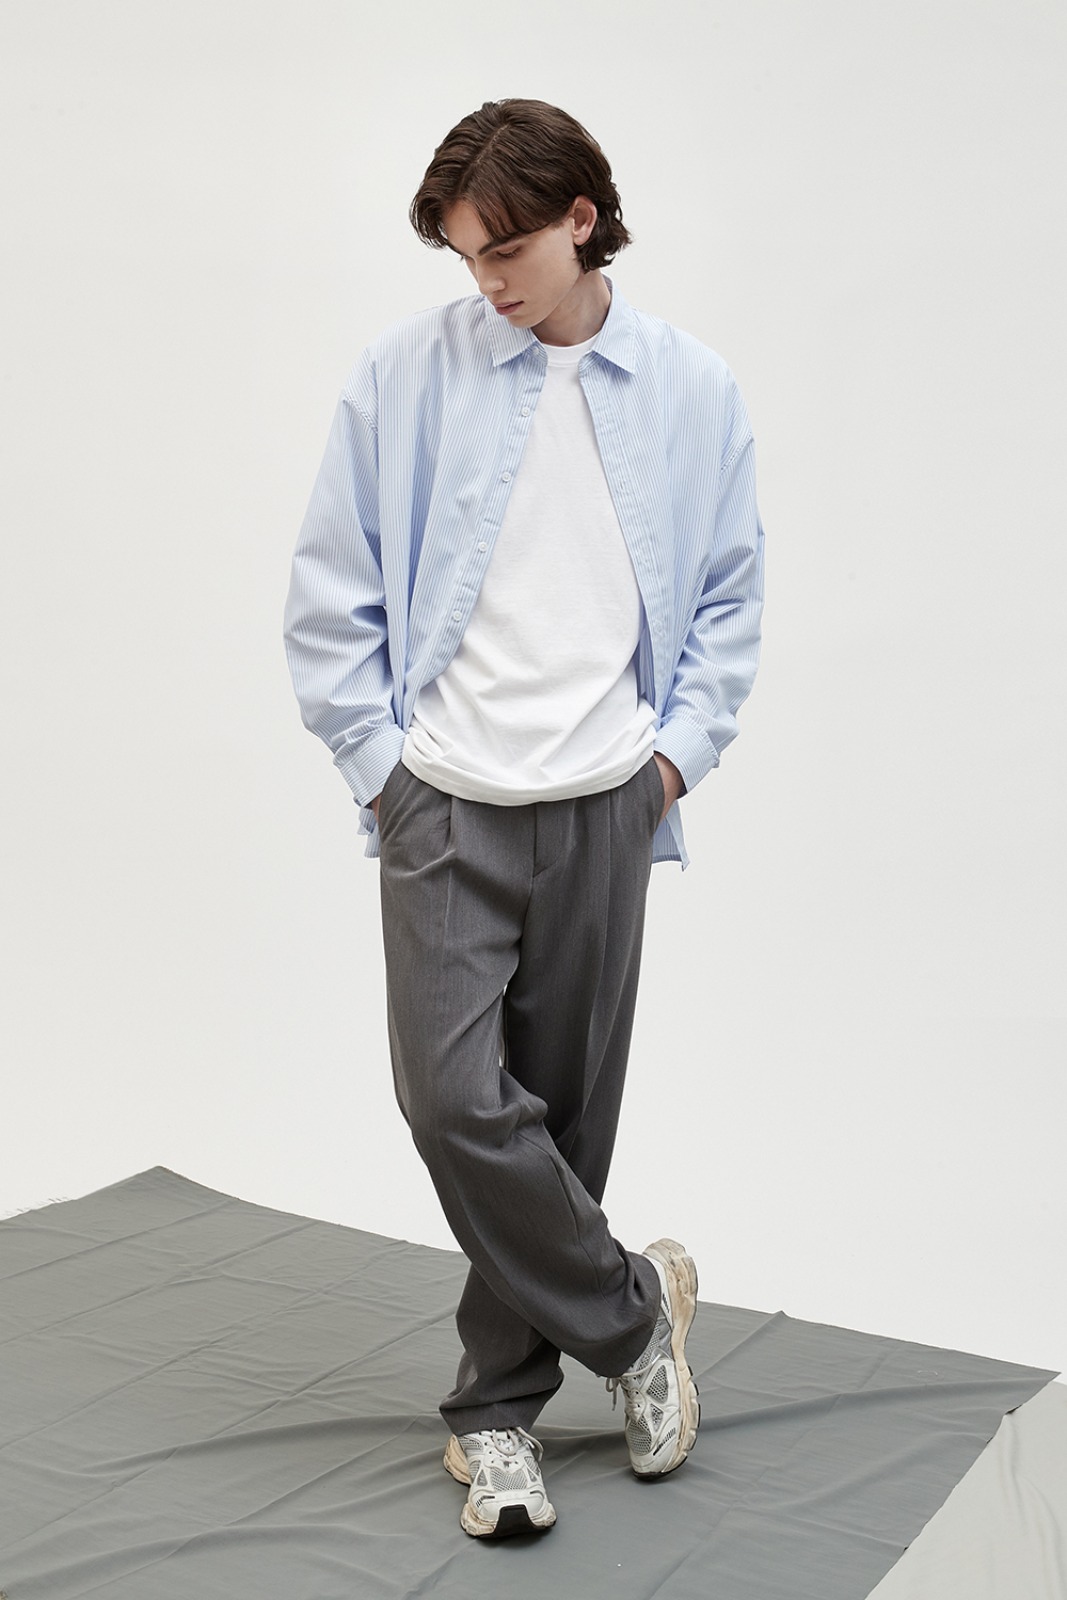 2022 S/S COLLECTION#1 LOOKBOOK